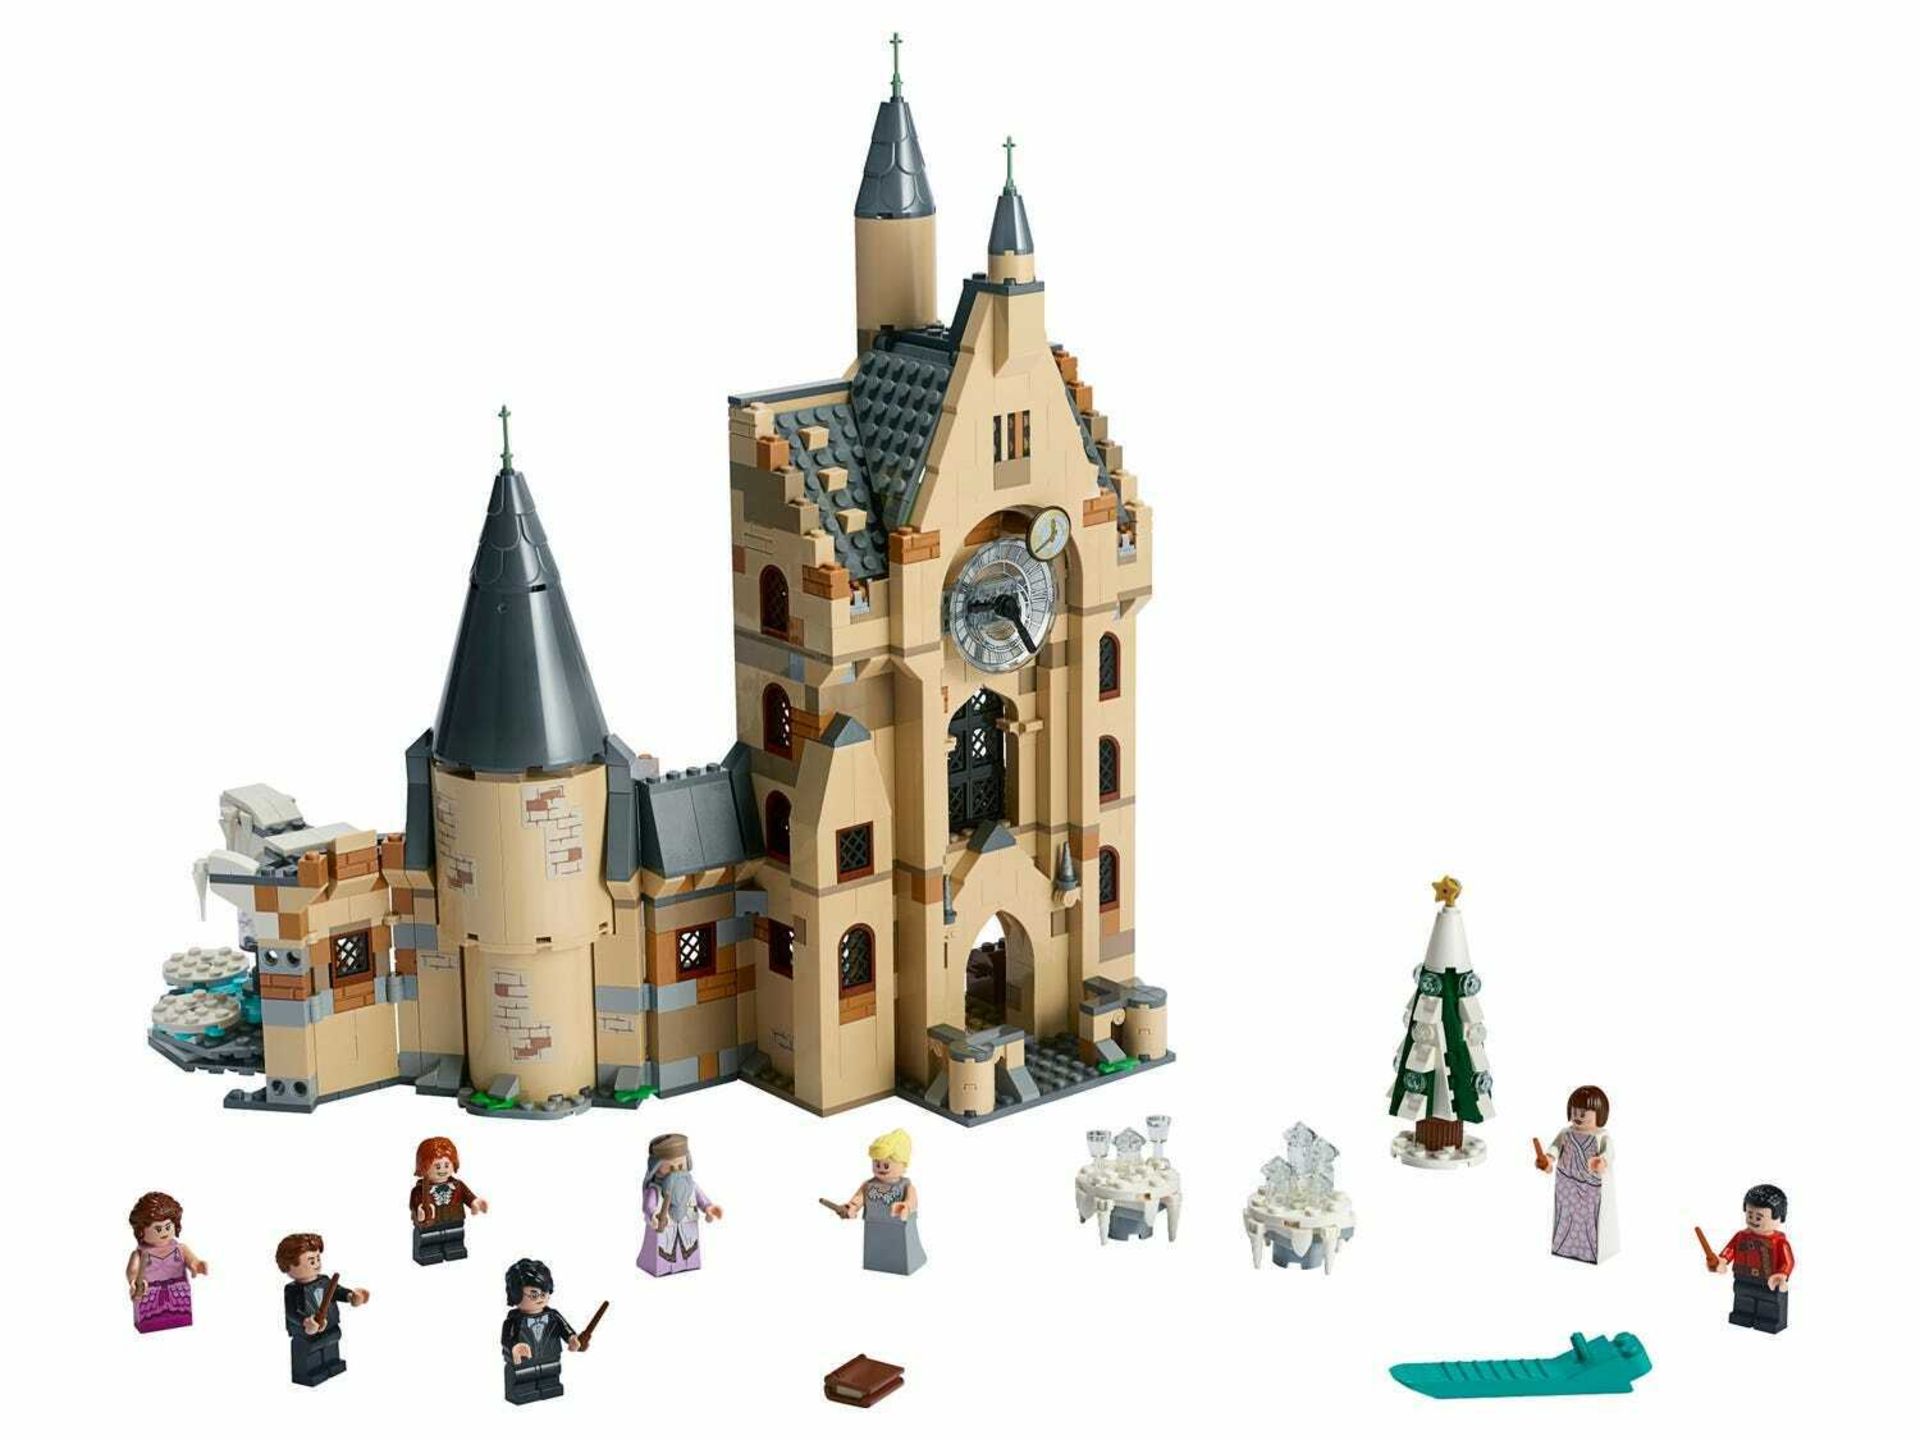 1 x Lego Harry Potter Hogwarts Clock Tower 75948 Lego Playset - Boxed and Sealed - CL007 - Location: - Image 3 of 5